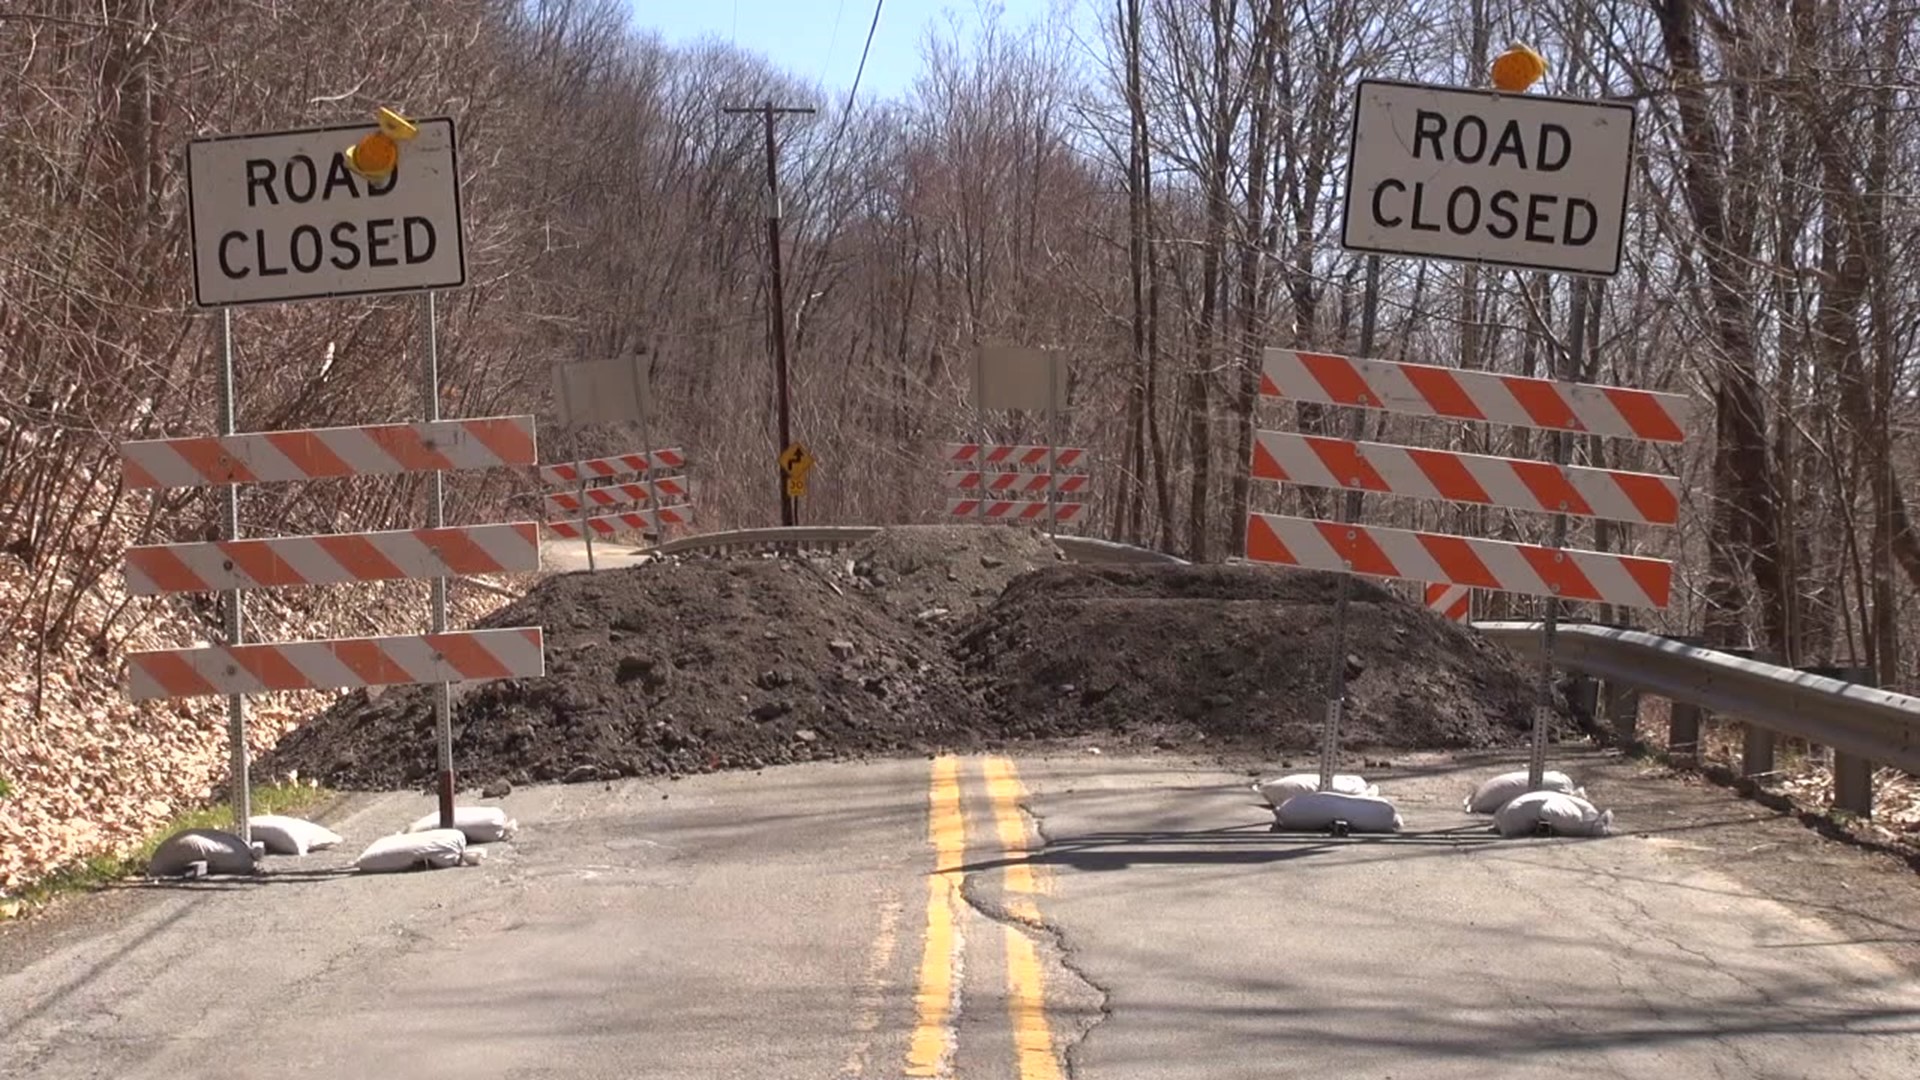 A road in Susquehanna County is closed due to an embankment slide and it will remain that way for quite some time, causing headaches for those living nearby.